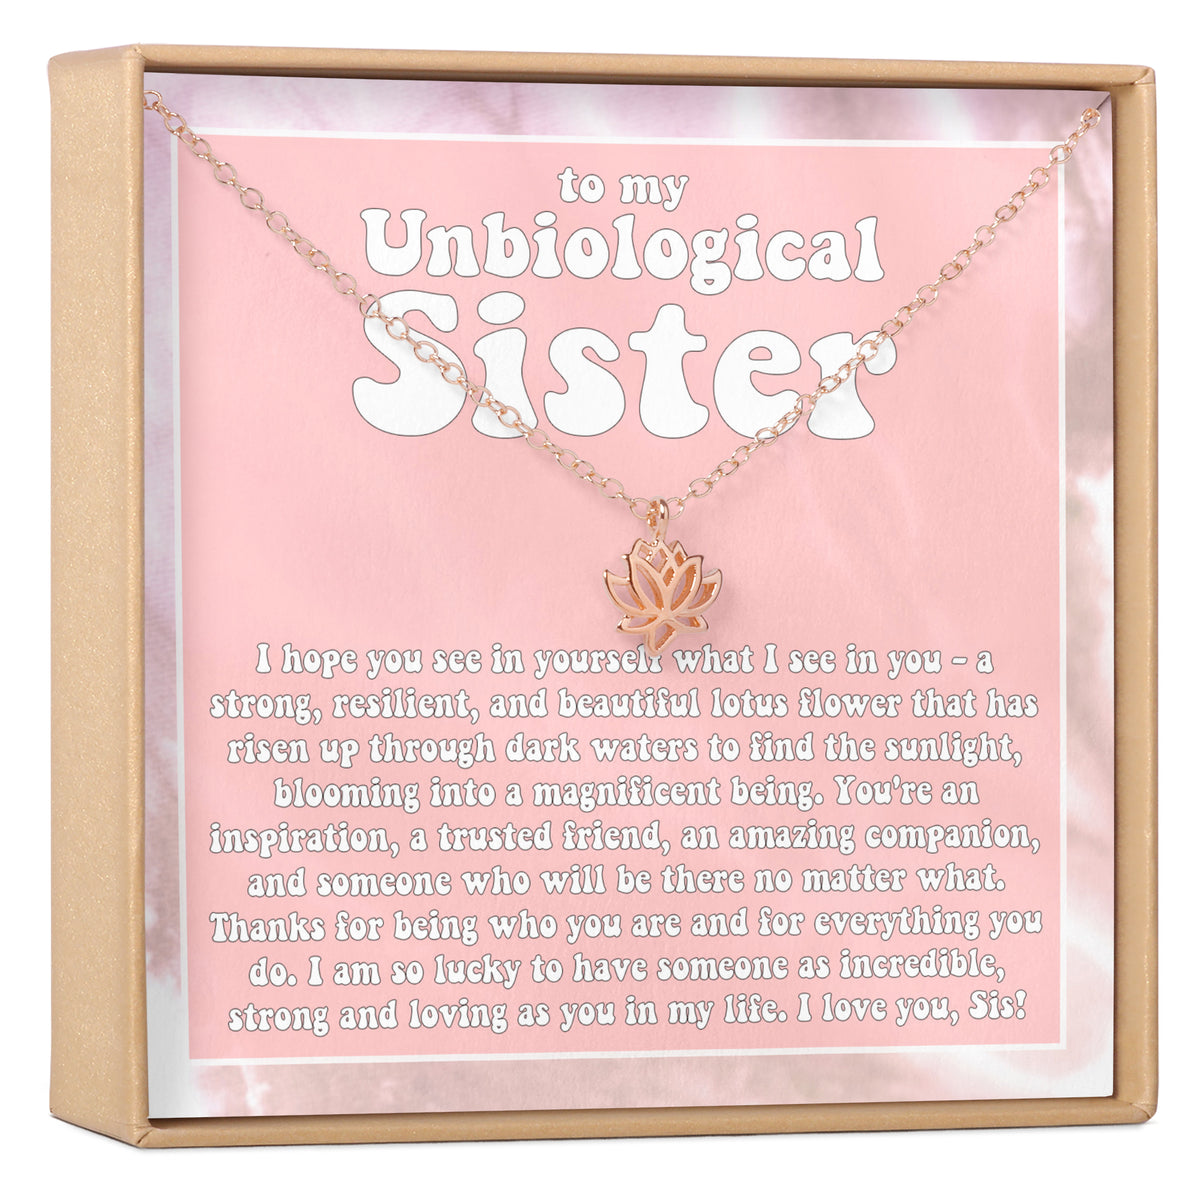 Unbiological Sisters Lotus Necklace